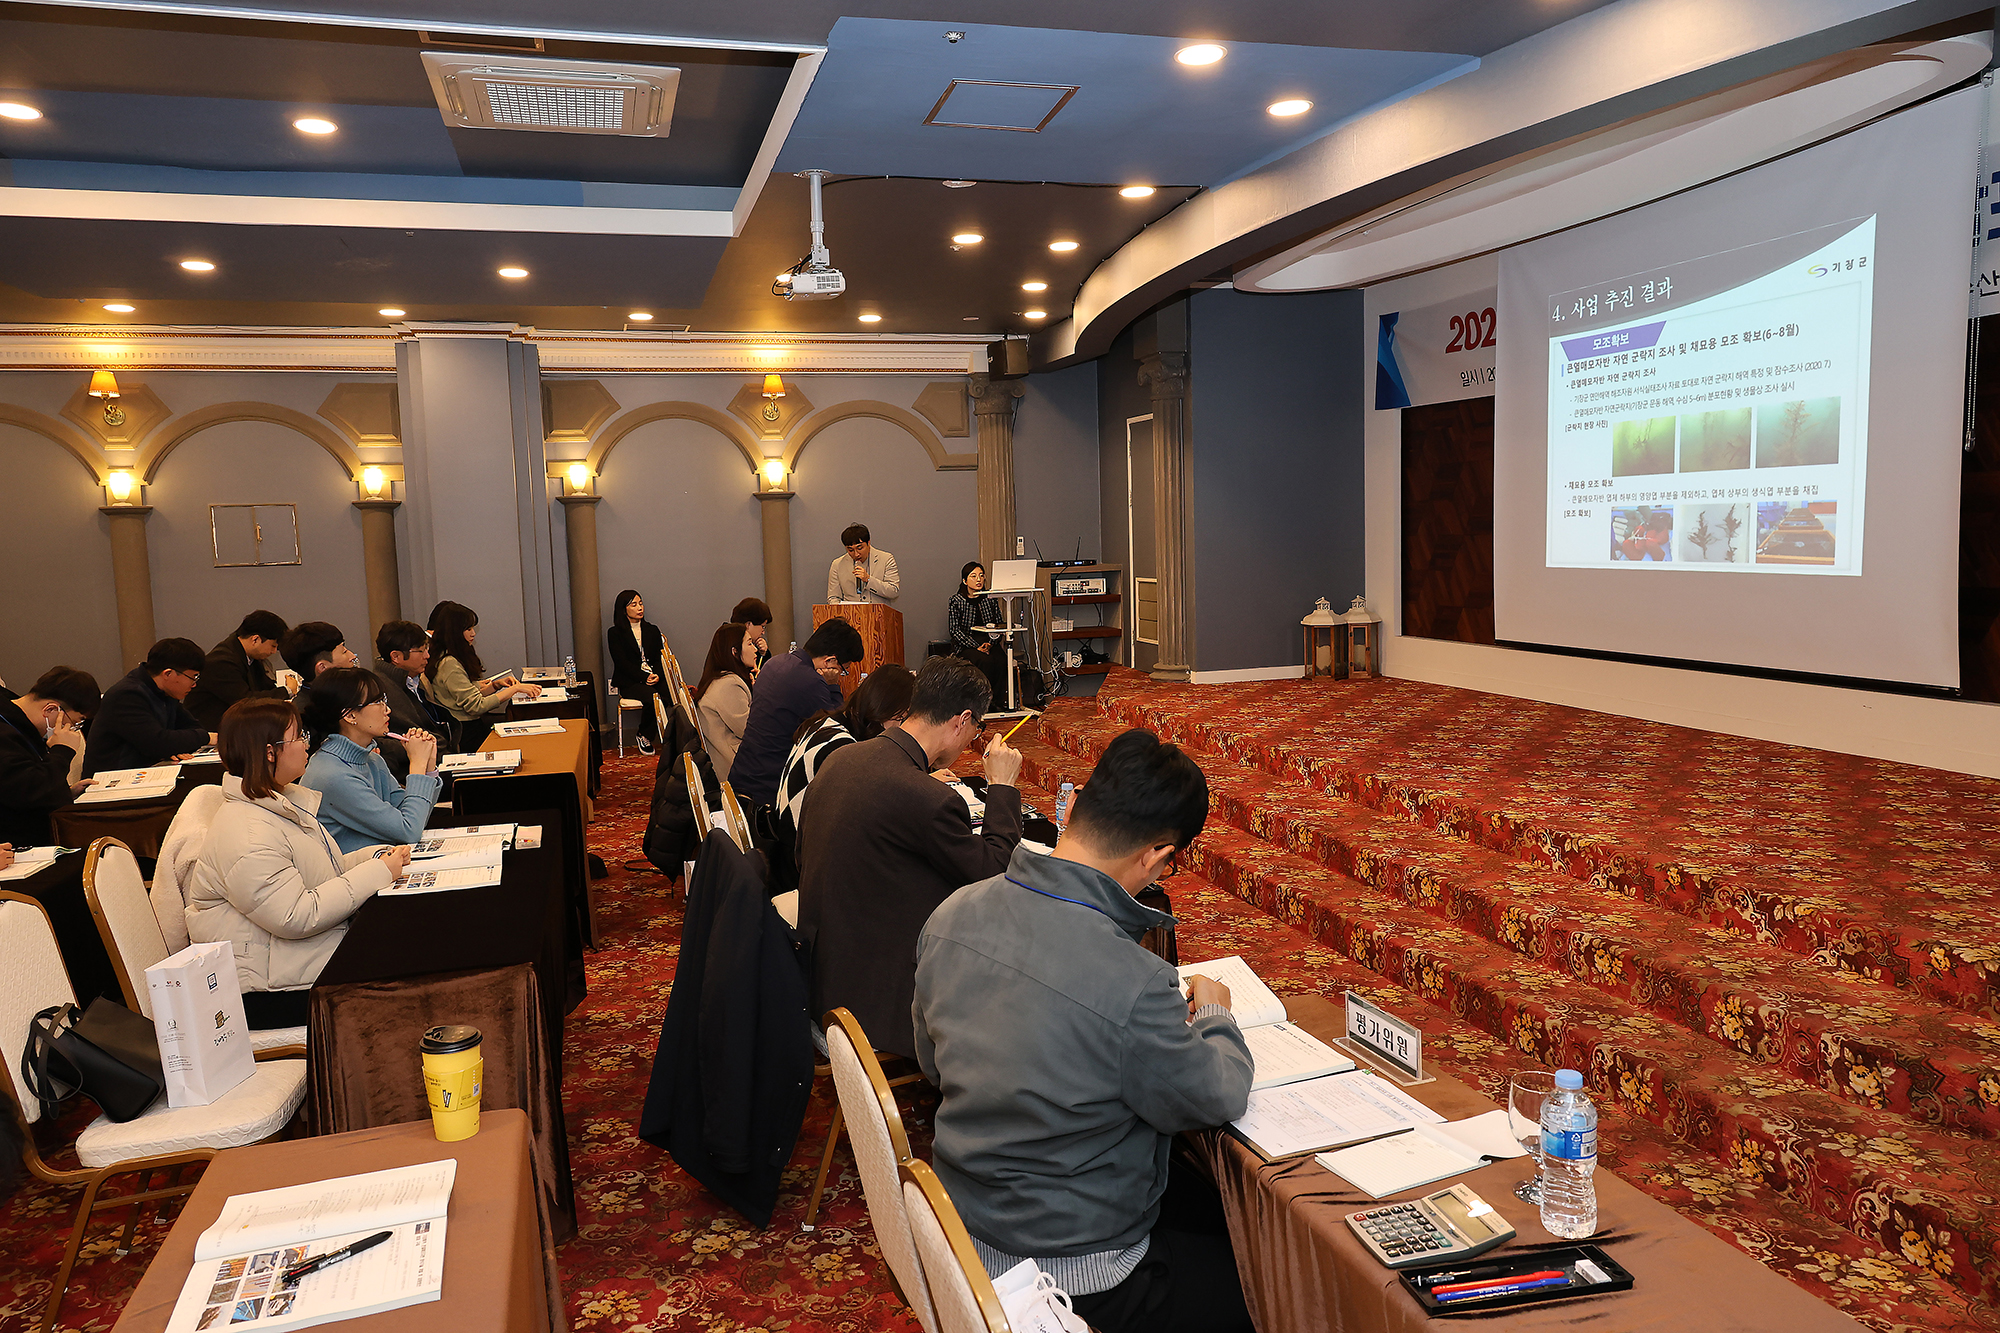 NIFS held a Presentation Event for Research and Technical Distribution  배경